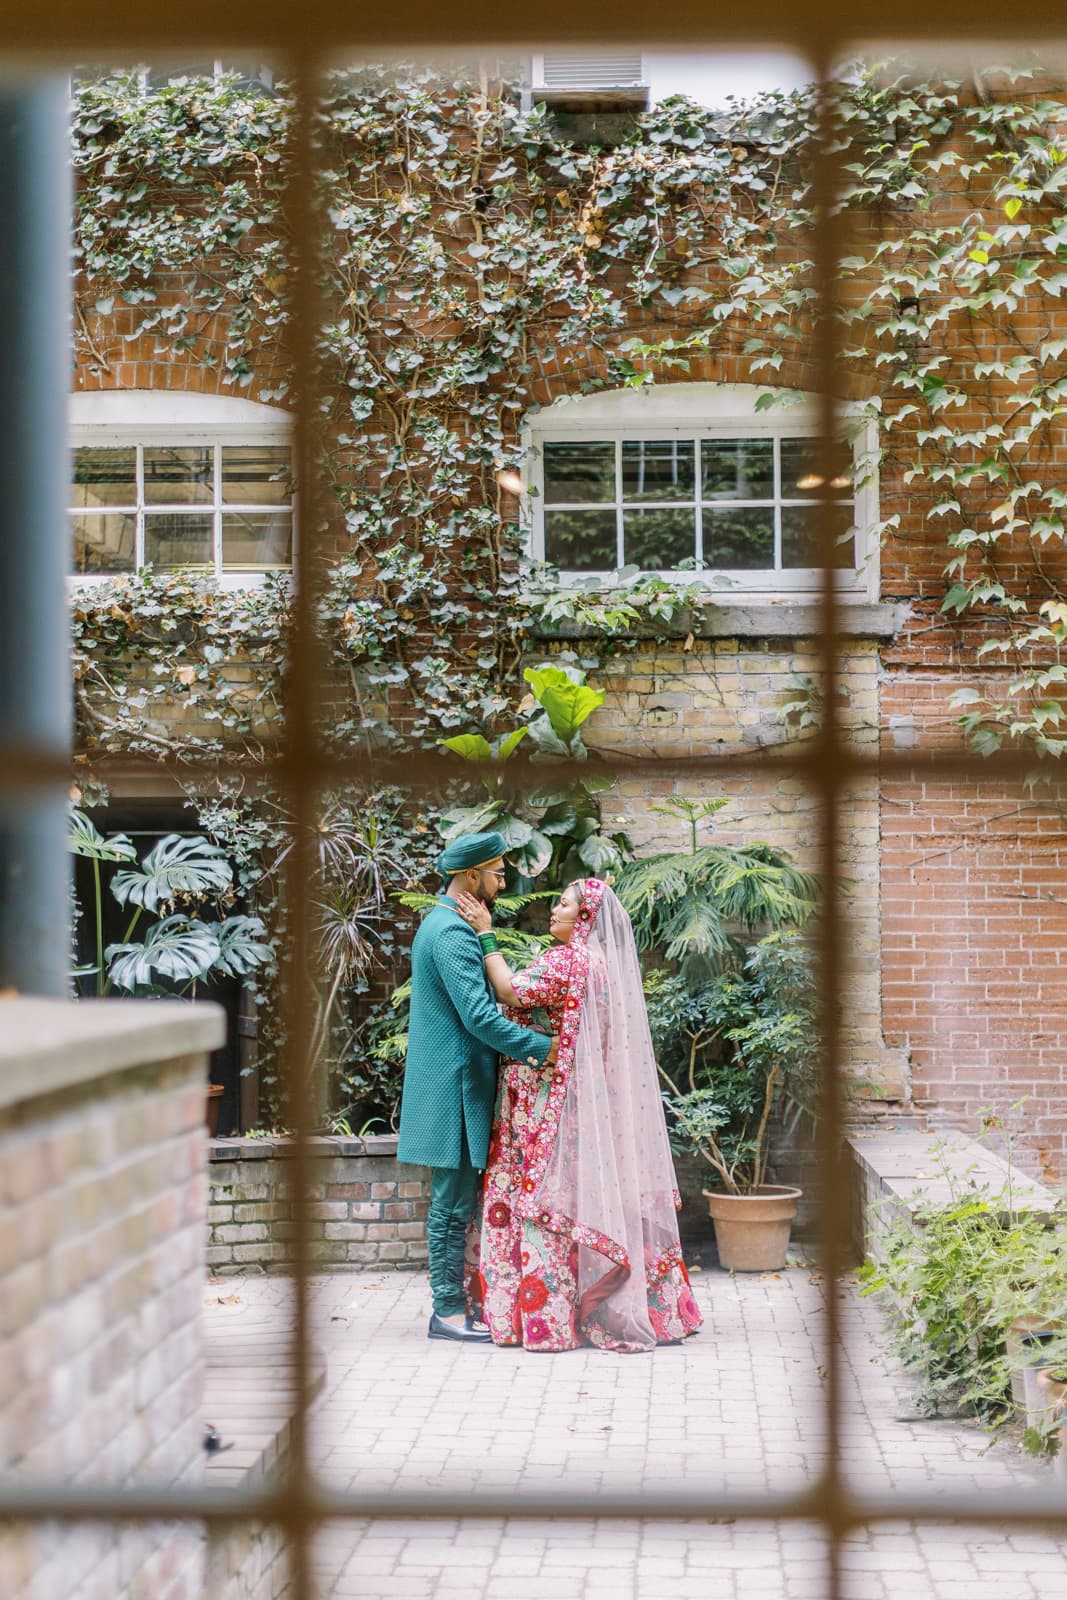 Photo of a bride and groom in Indian attire through steel framed windows